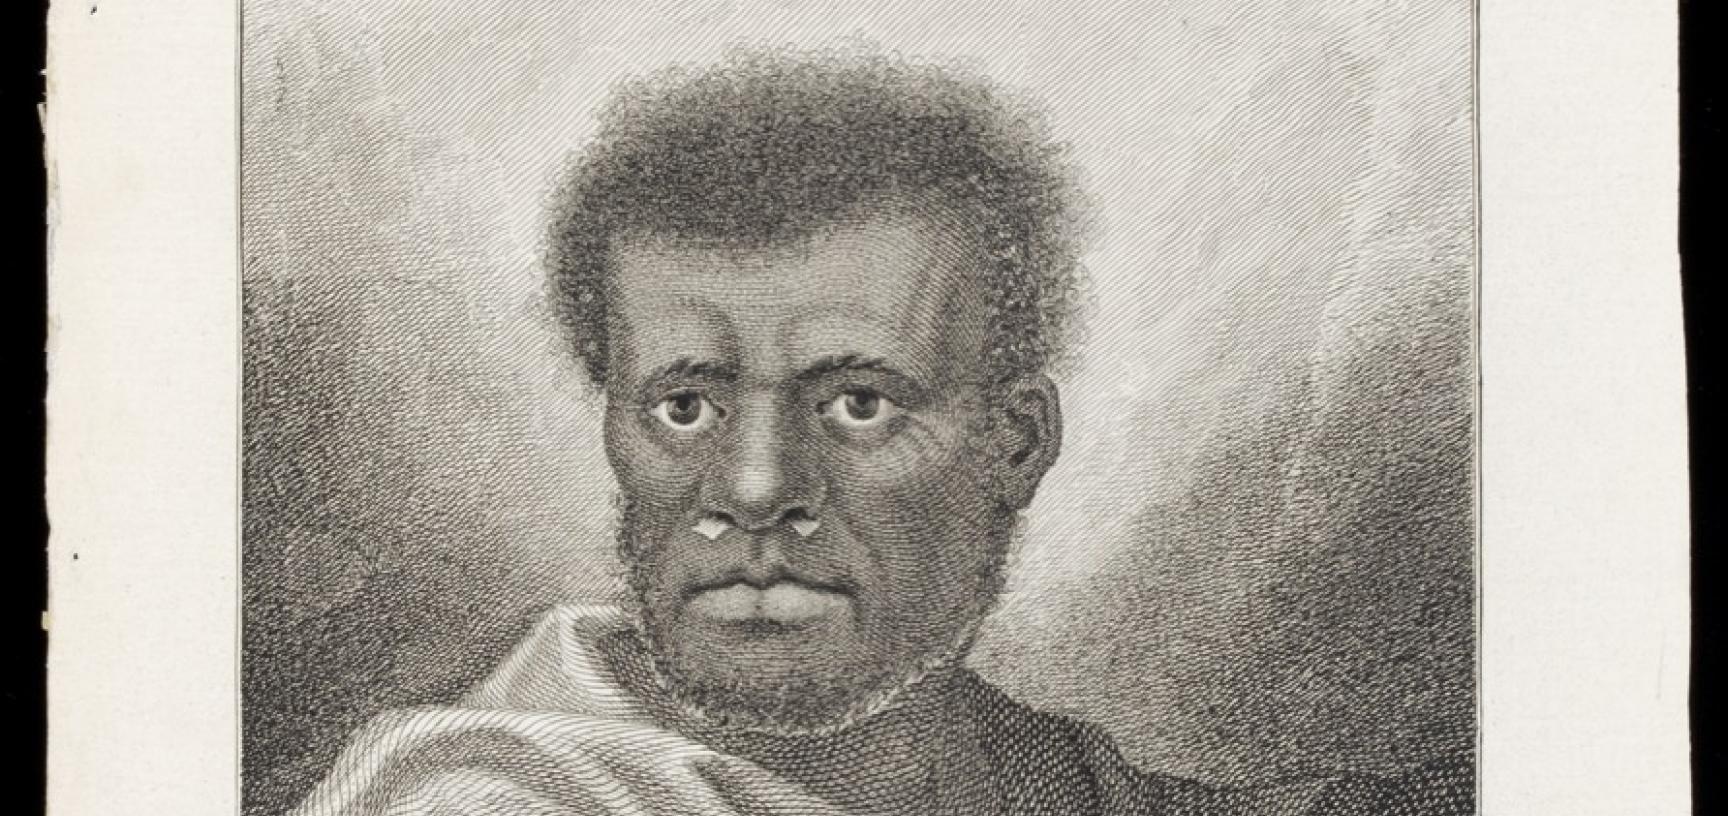 Man of Vanuatu (name unknown), engraved for publication by James Caldwell after an original drawing by William Hodges. (Copyright Pitt Rivers Museum, University of Oxford. Accession Number: 2013.28.142)